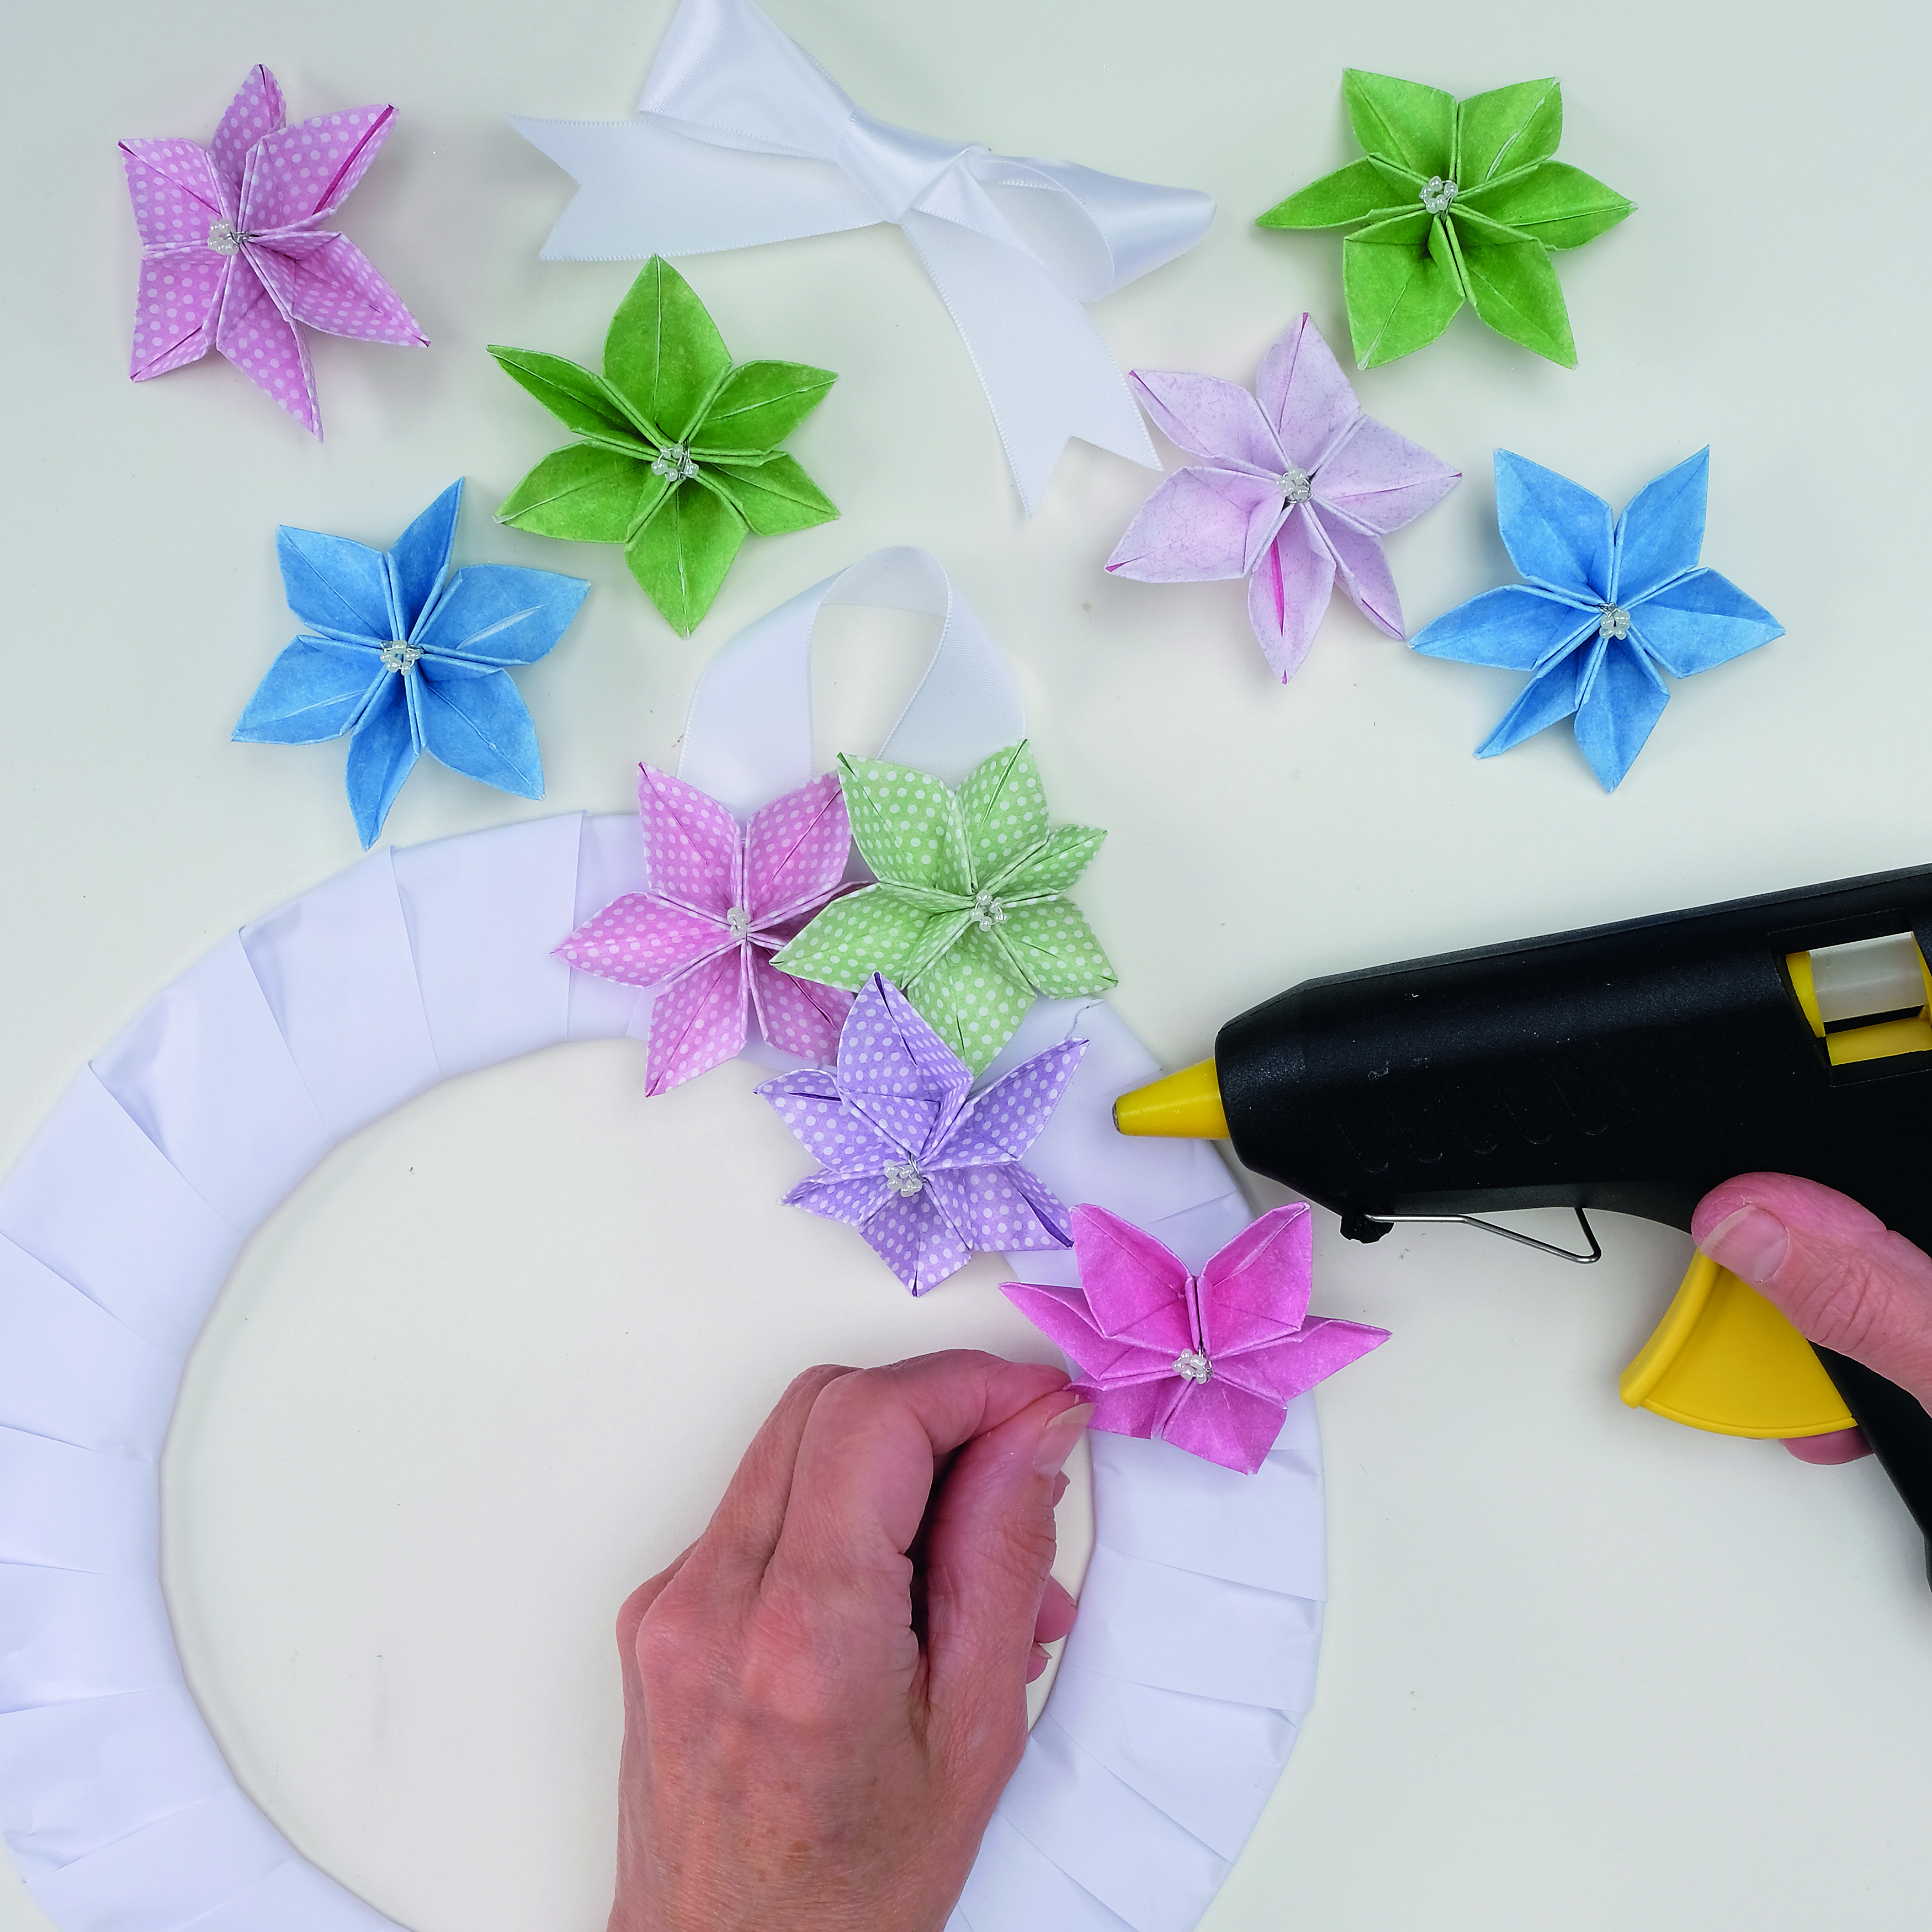 How to make an origami wreath – step 2